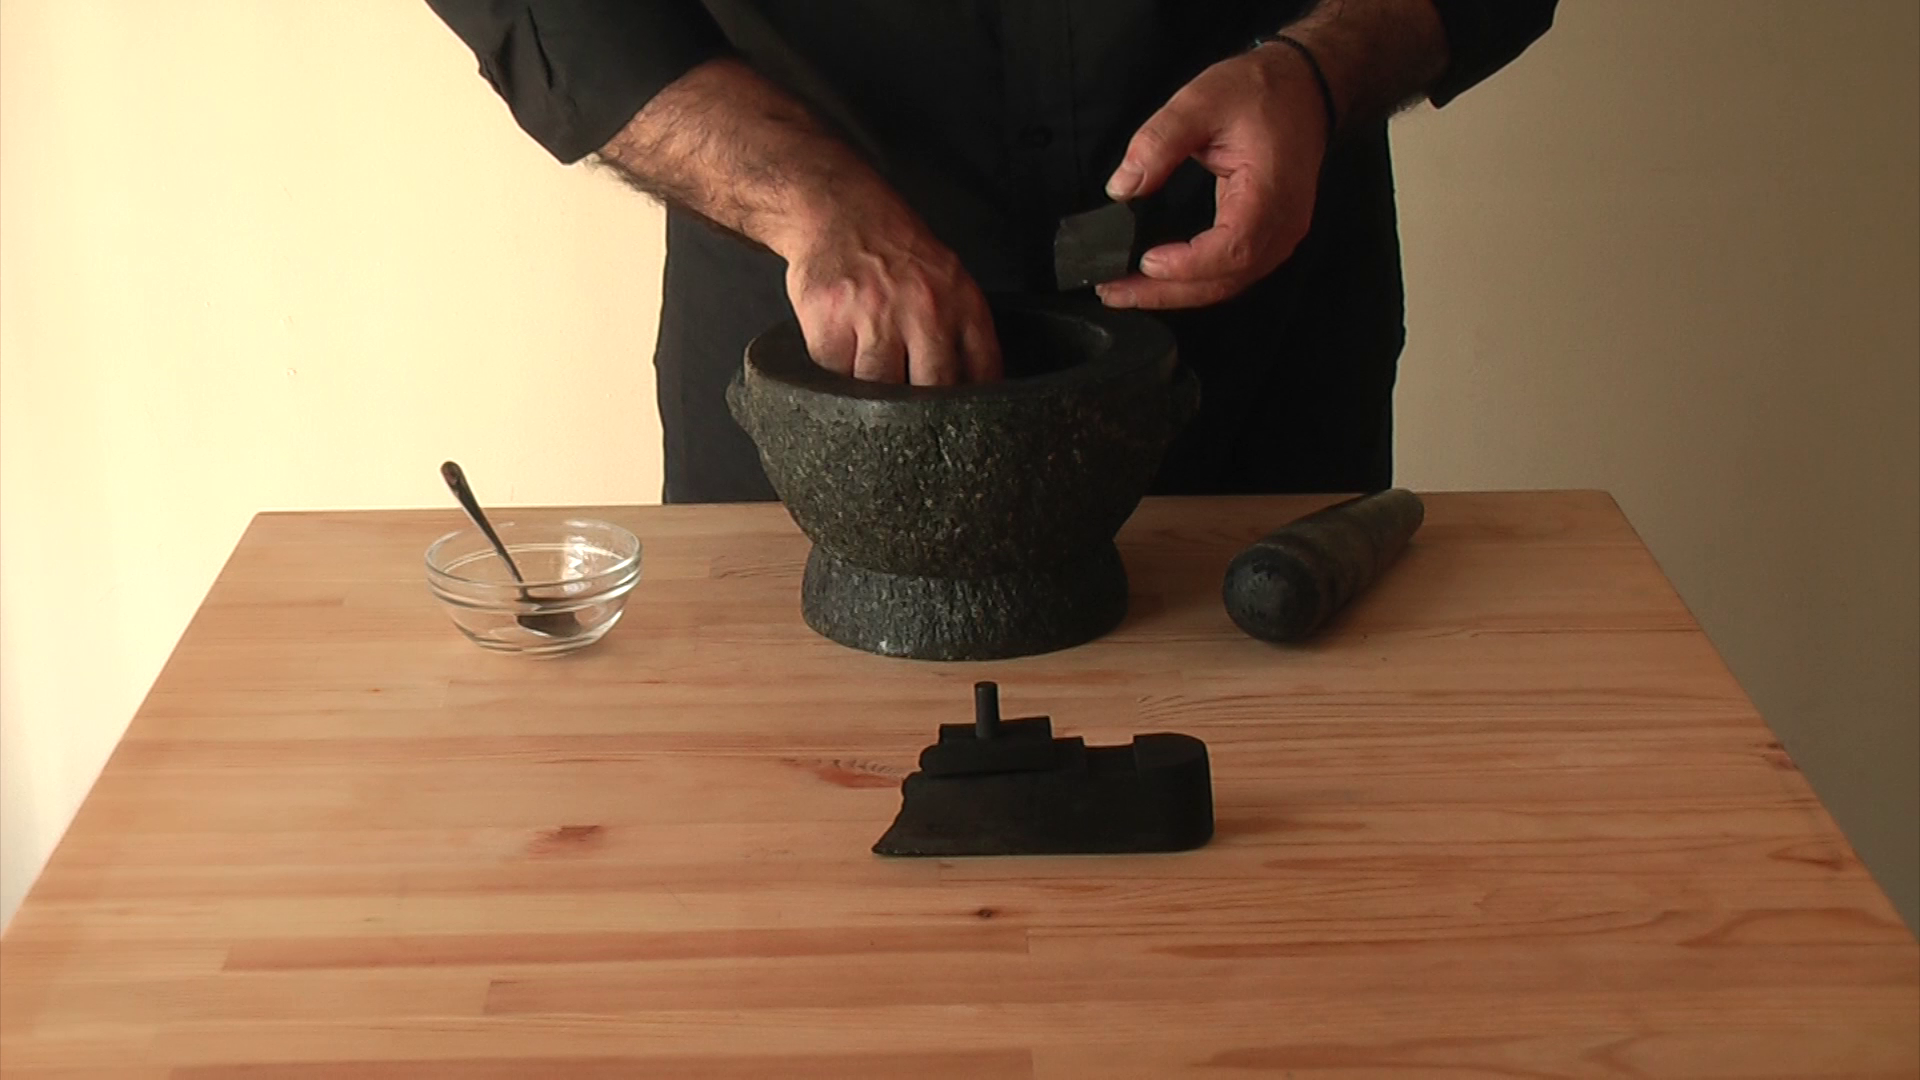    Grinding transobjects  , 2013, Still from video 